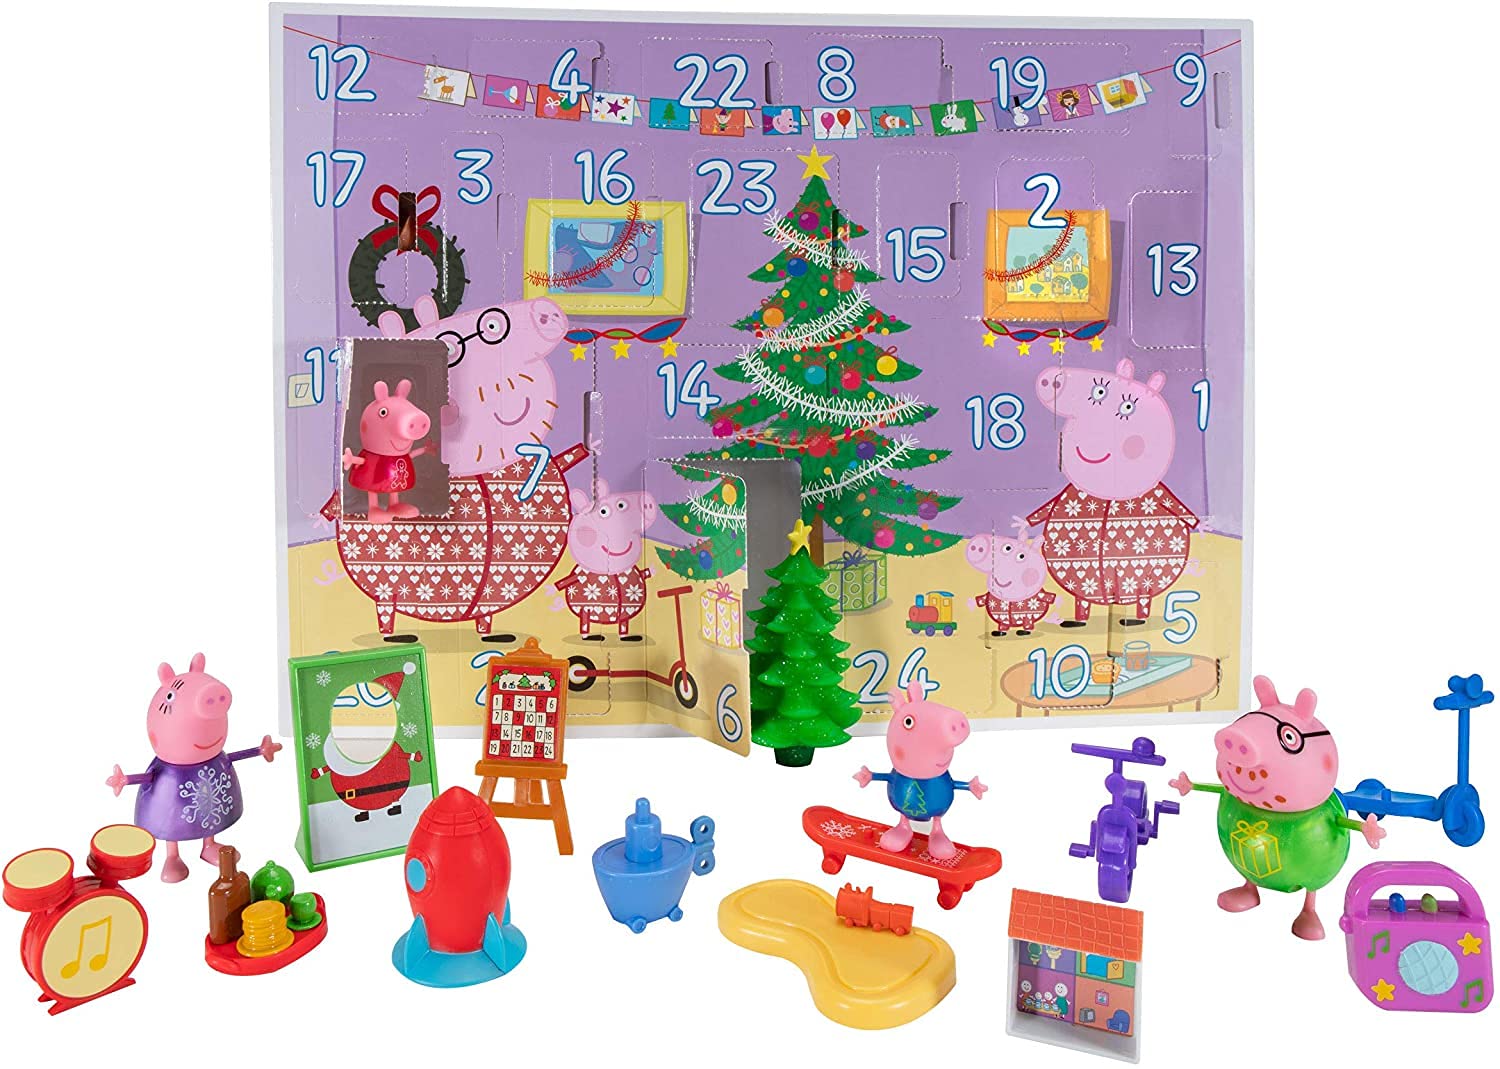 2021 Peppa Pig Holiday Advent Calendar for Kids, 24-Pieces - Includes Family Character Figures & Accessories from The World of Peppa Pig - Toy Christmas Gift for Boys & Girls - Ages 2+